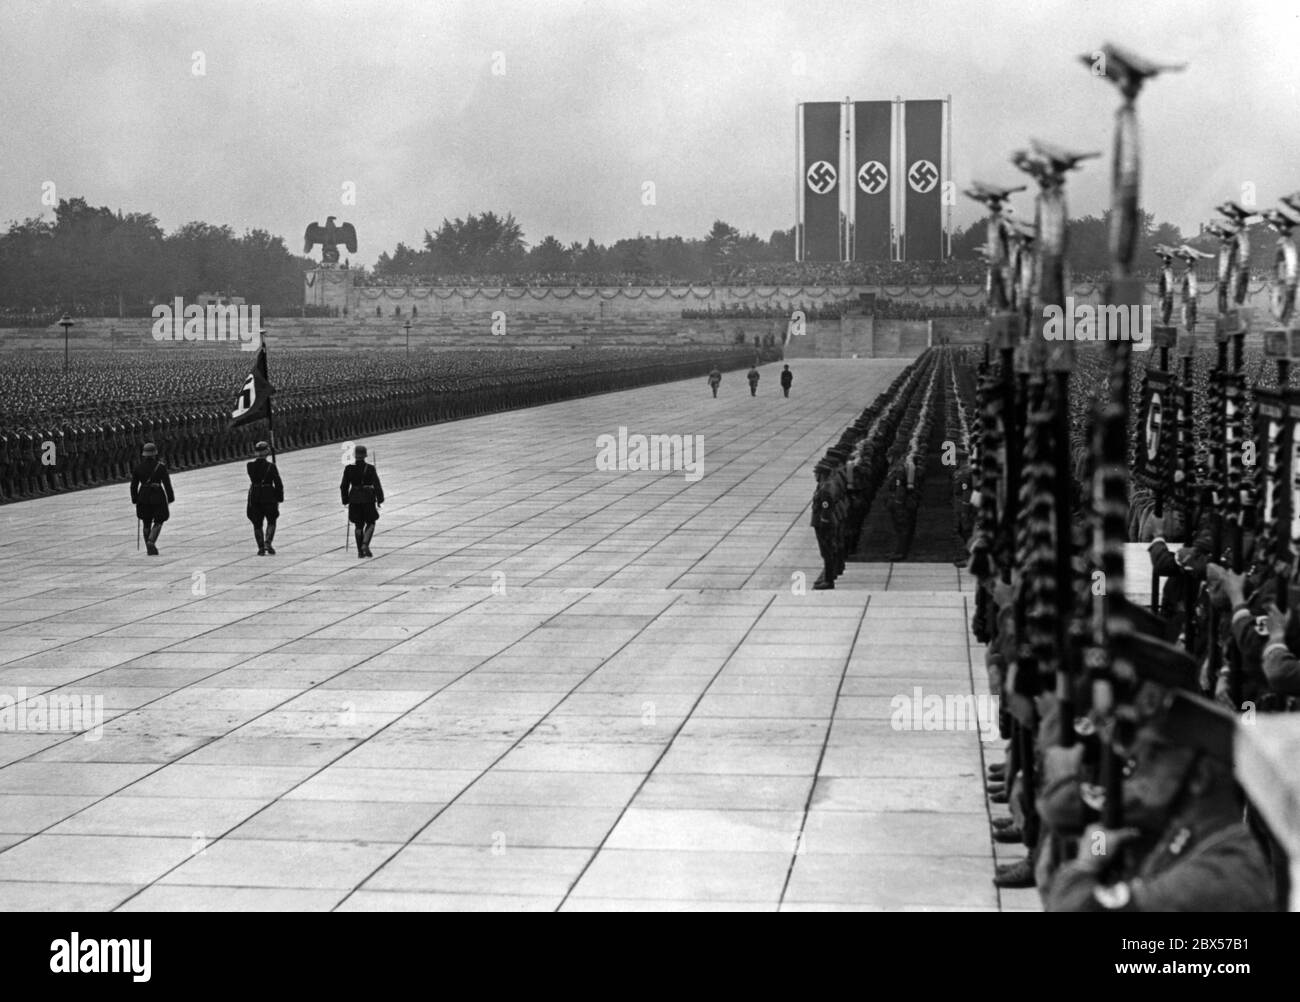 At the grand roll call of the SA, SS, NSKK and NSFK in the Luitpold Arena on the Reich Party Rally Grounds, after the laying of the wreath at the memorial, from left to right: Viktor Lutze, Adolf Hitler and Heinrich Himmler return to the rostrum. In the foreground is the Blood Flag. Stock Photo